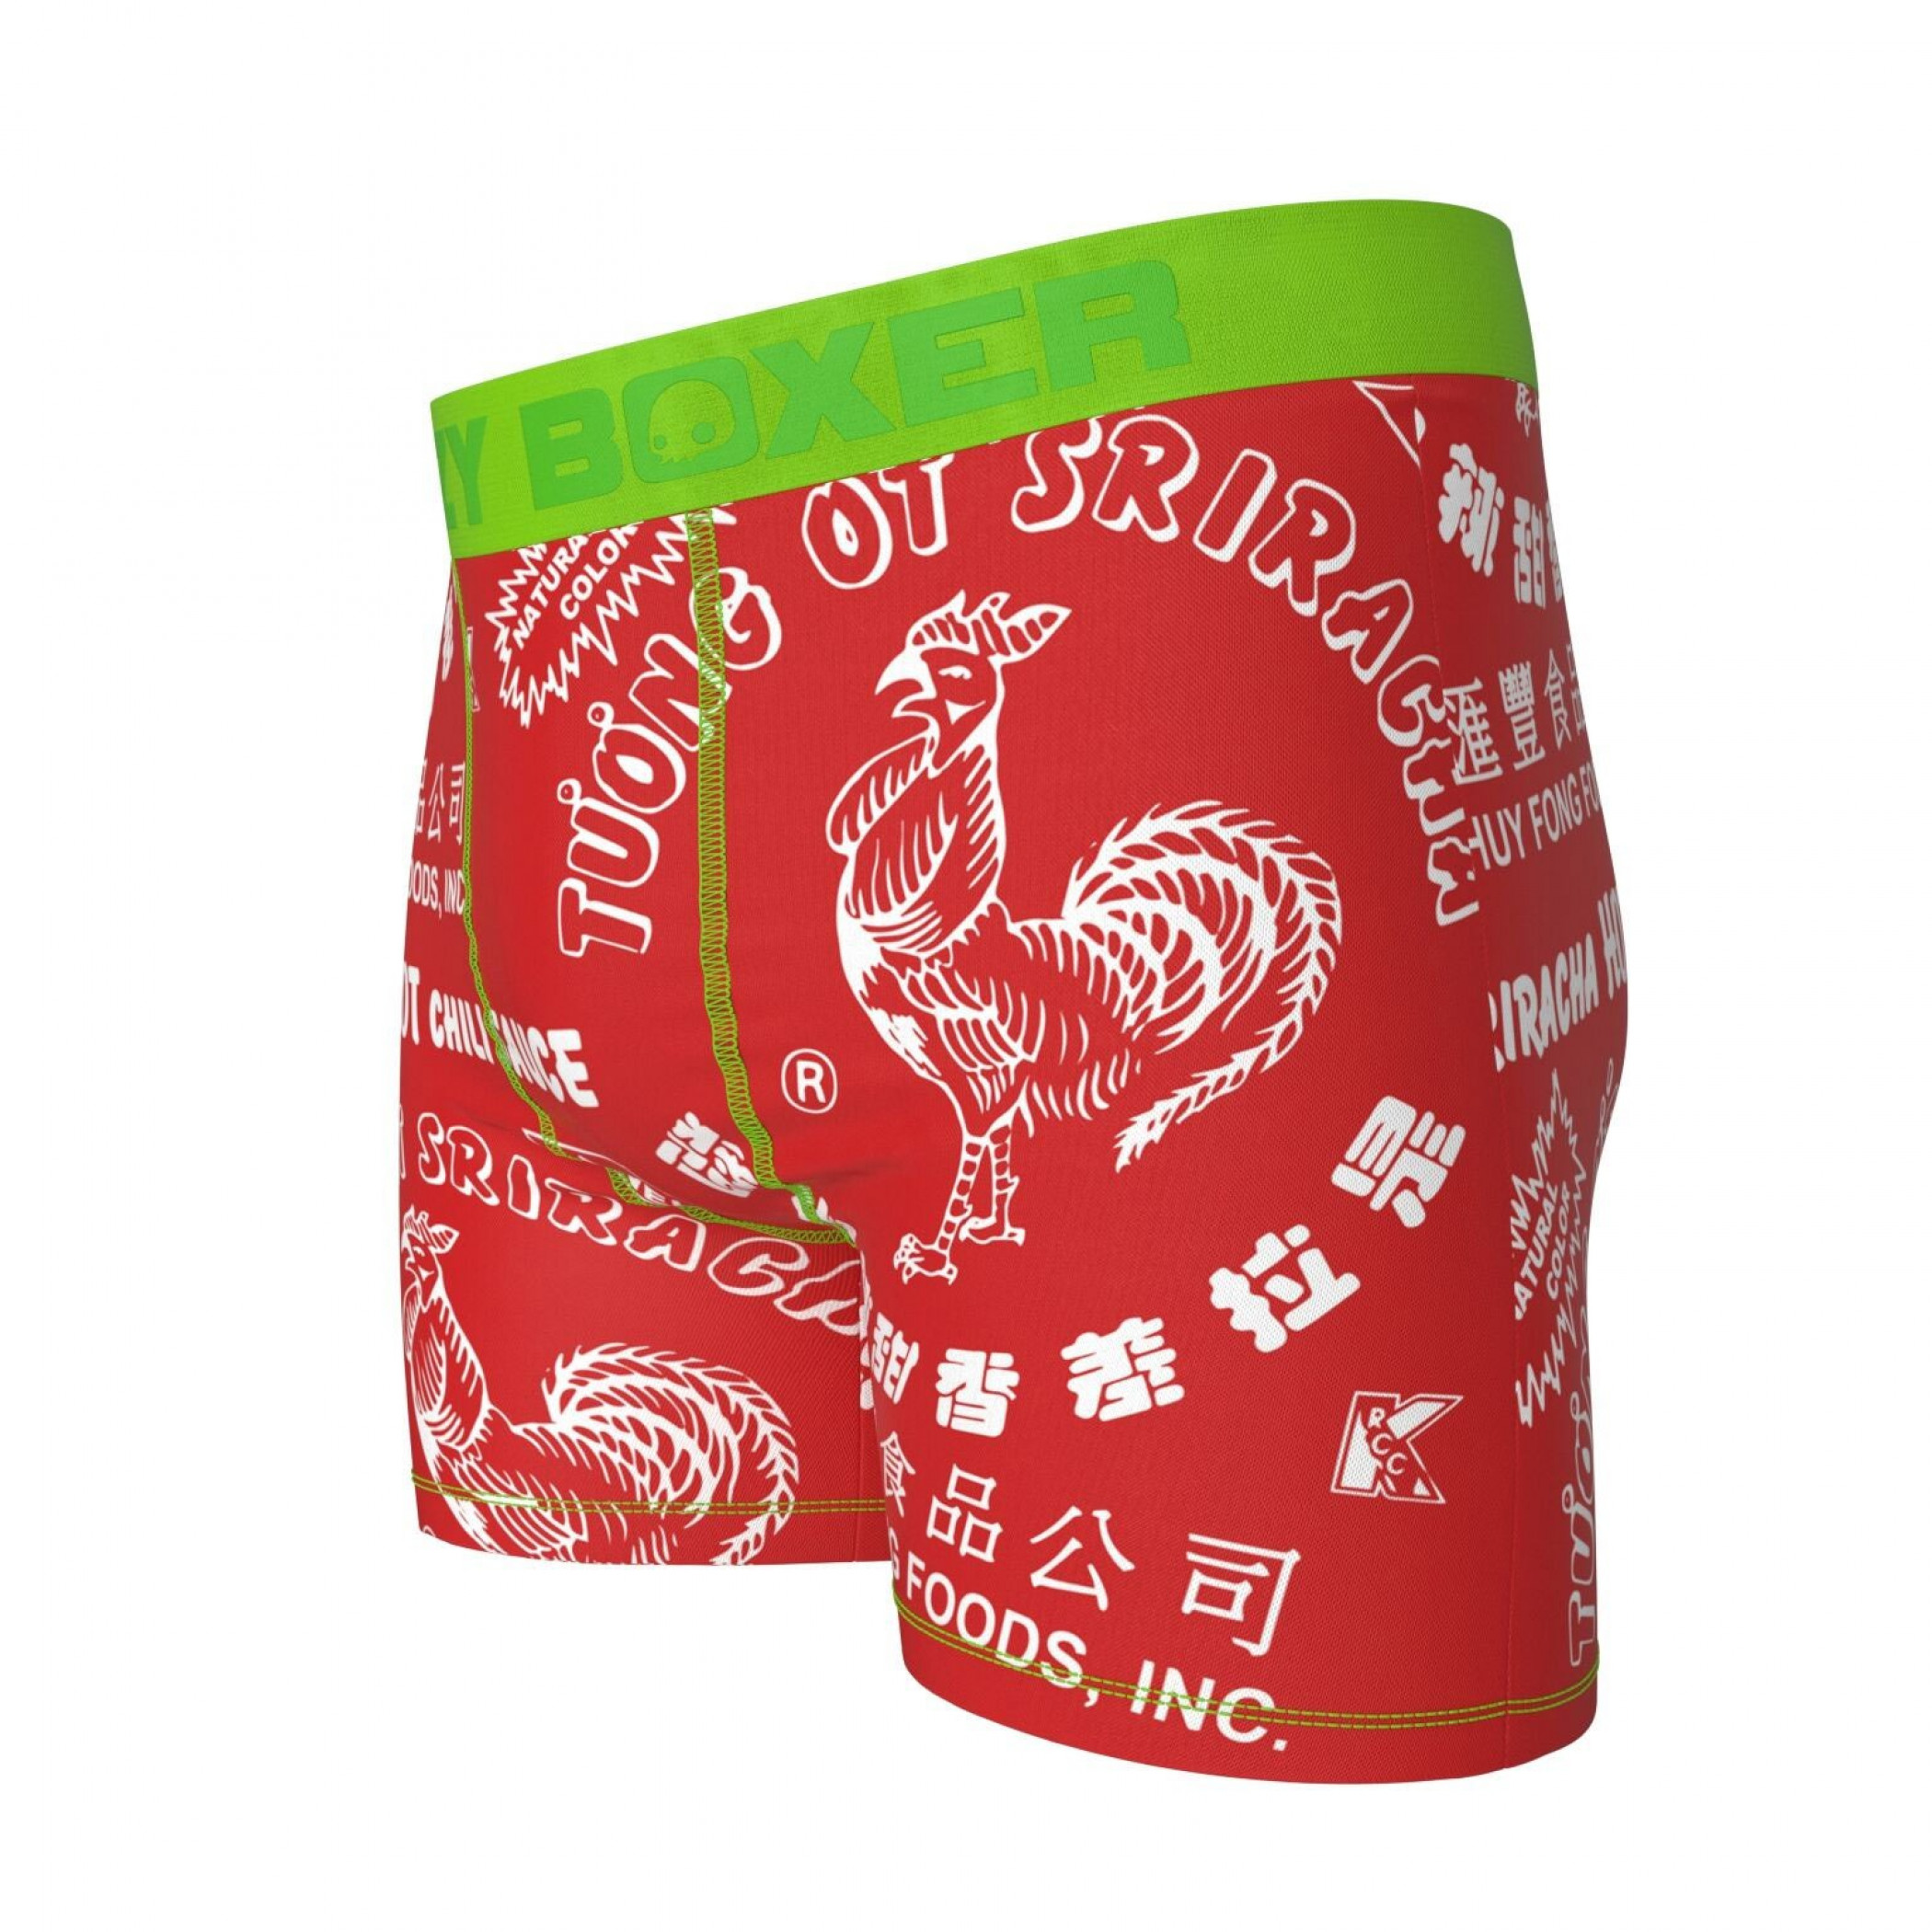 Sriracha Hot Chili Sauce Boxer Briefs in Chinese Take Out Container-XLarge - image 4 of 6